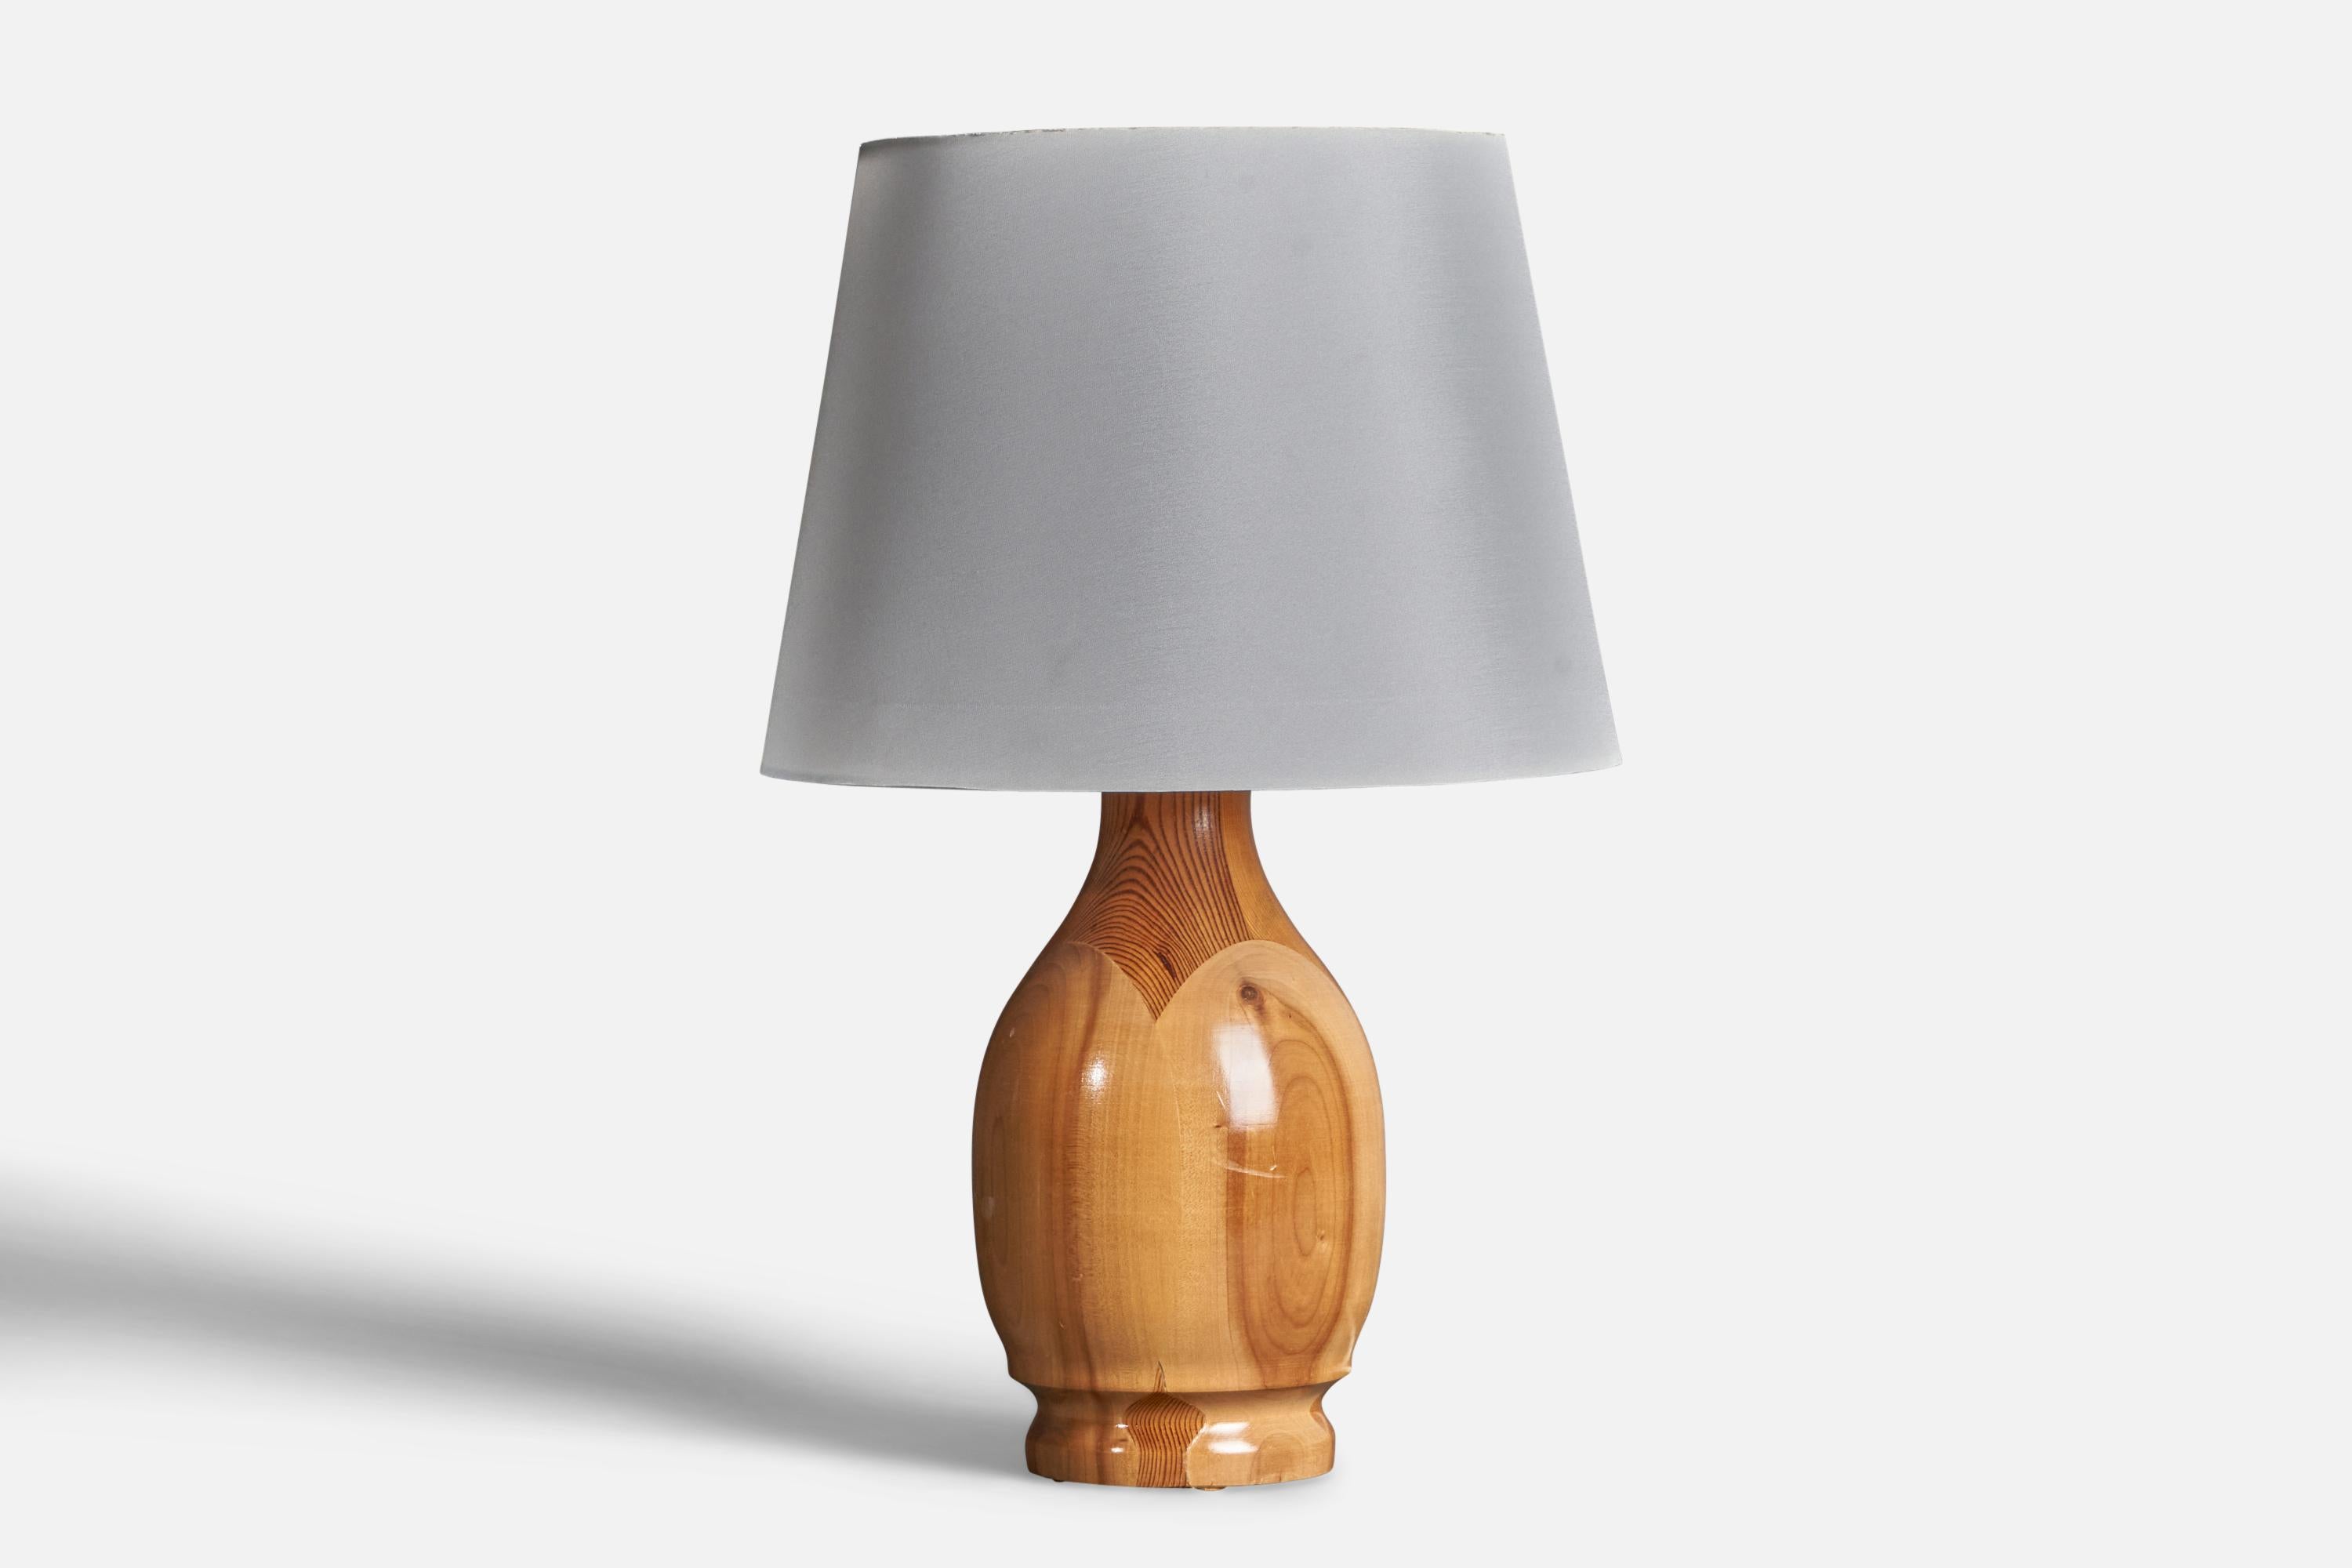 Late 20th Century Swedish, Minimalist Table Lamp, Solid Pine, Rattan, Sweden, 1989 For Sale